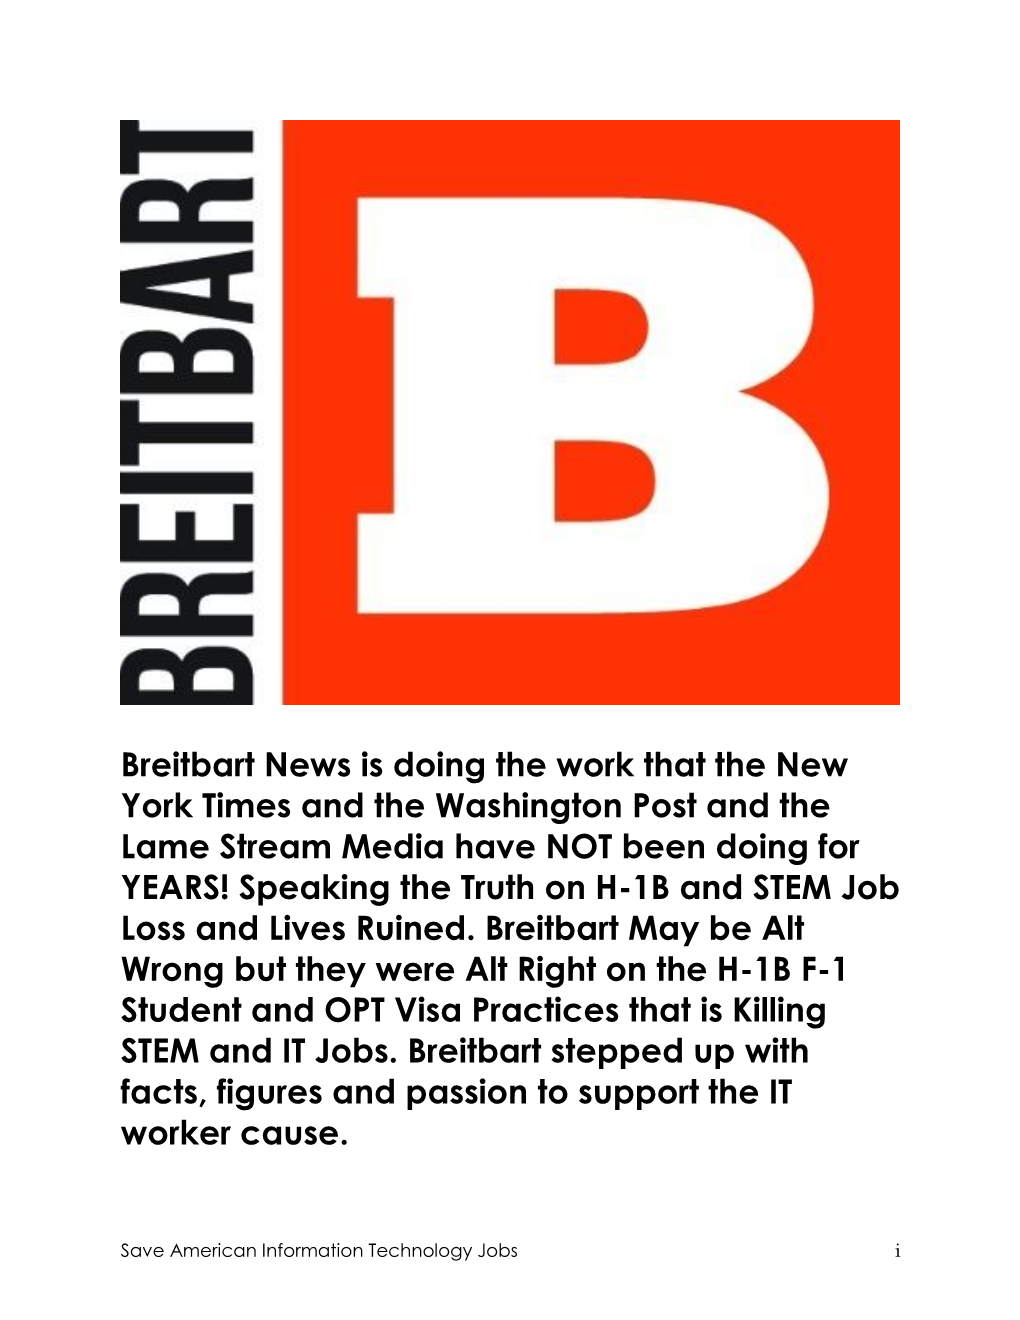 Breitbart News Is Doing the Work That the New York Times and The